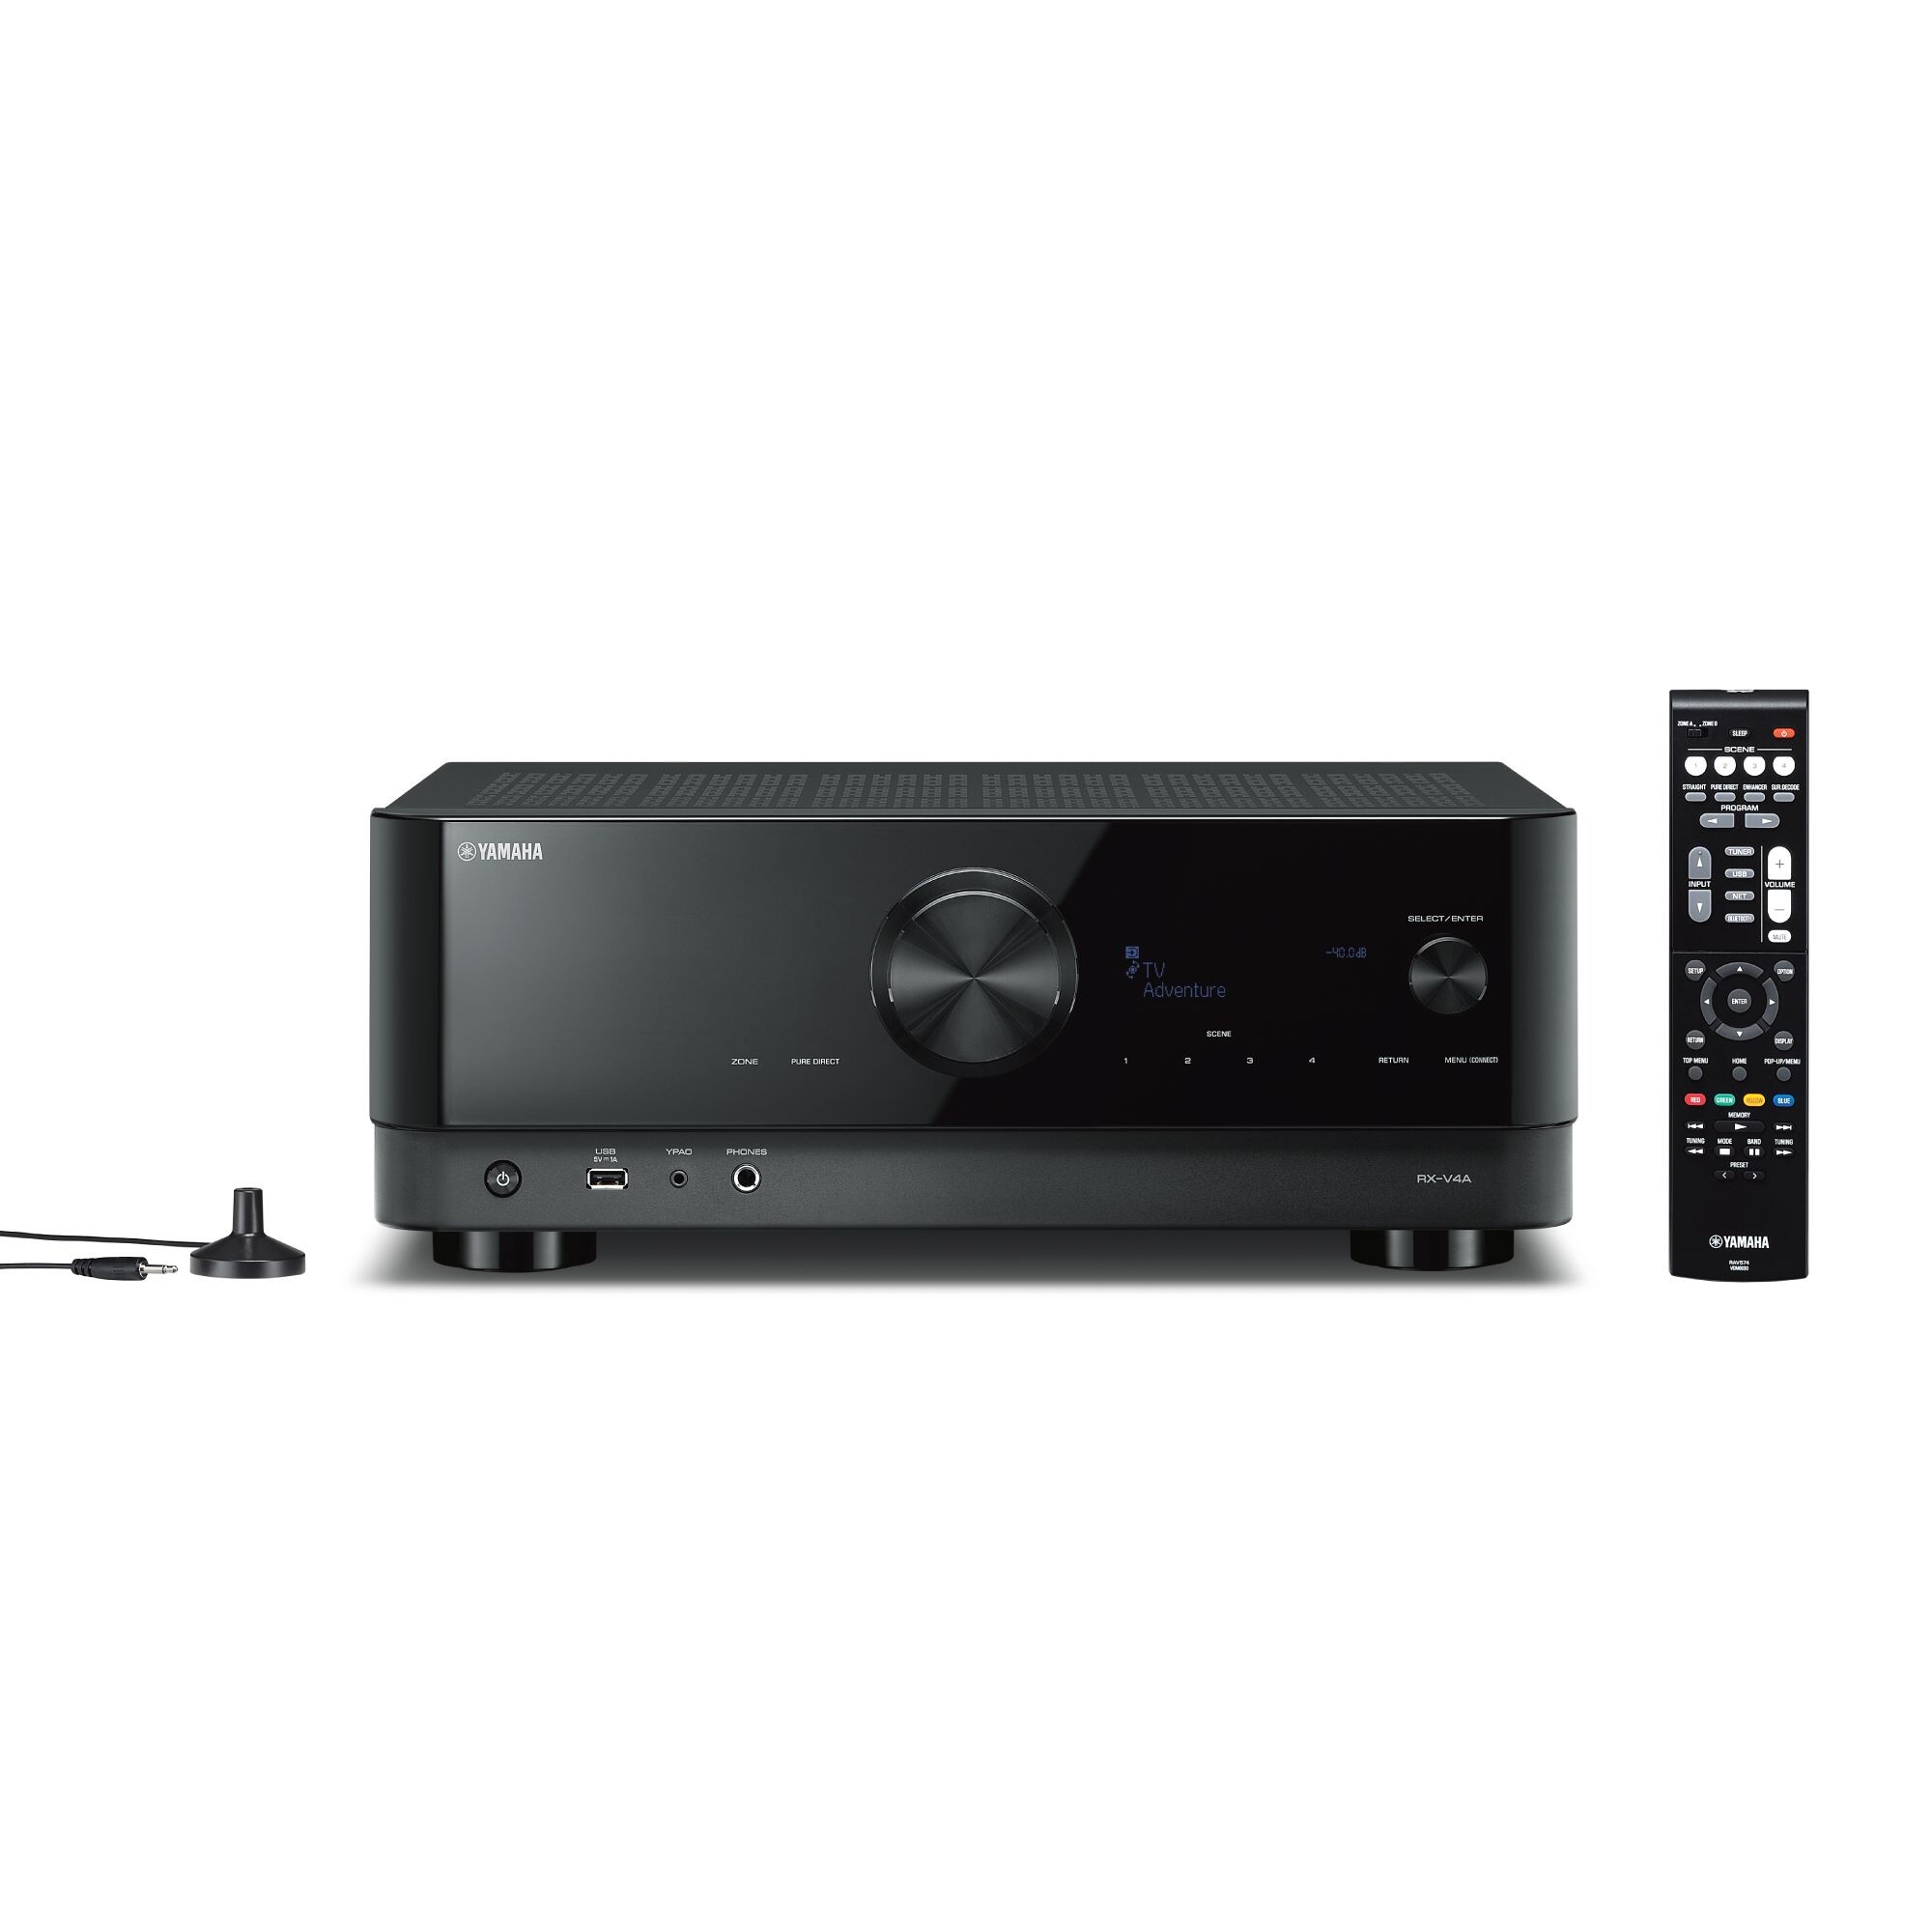 Yamaha-RX-V4A-5-1-Kanal-AV-Receiver-mit-CINEMA-DSP-3D-HDMITM-4-in-1-out-wireless-surround